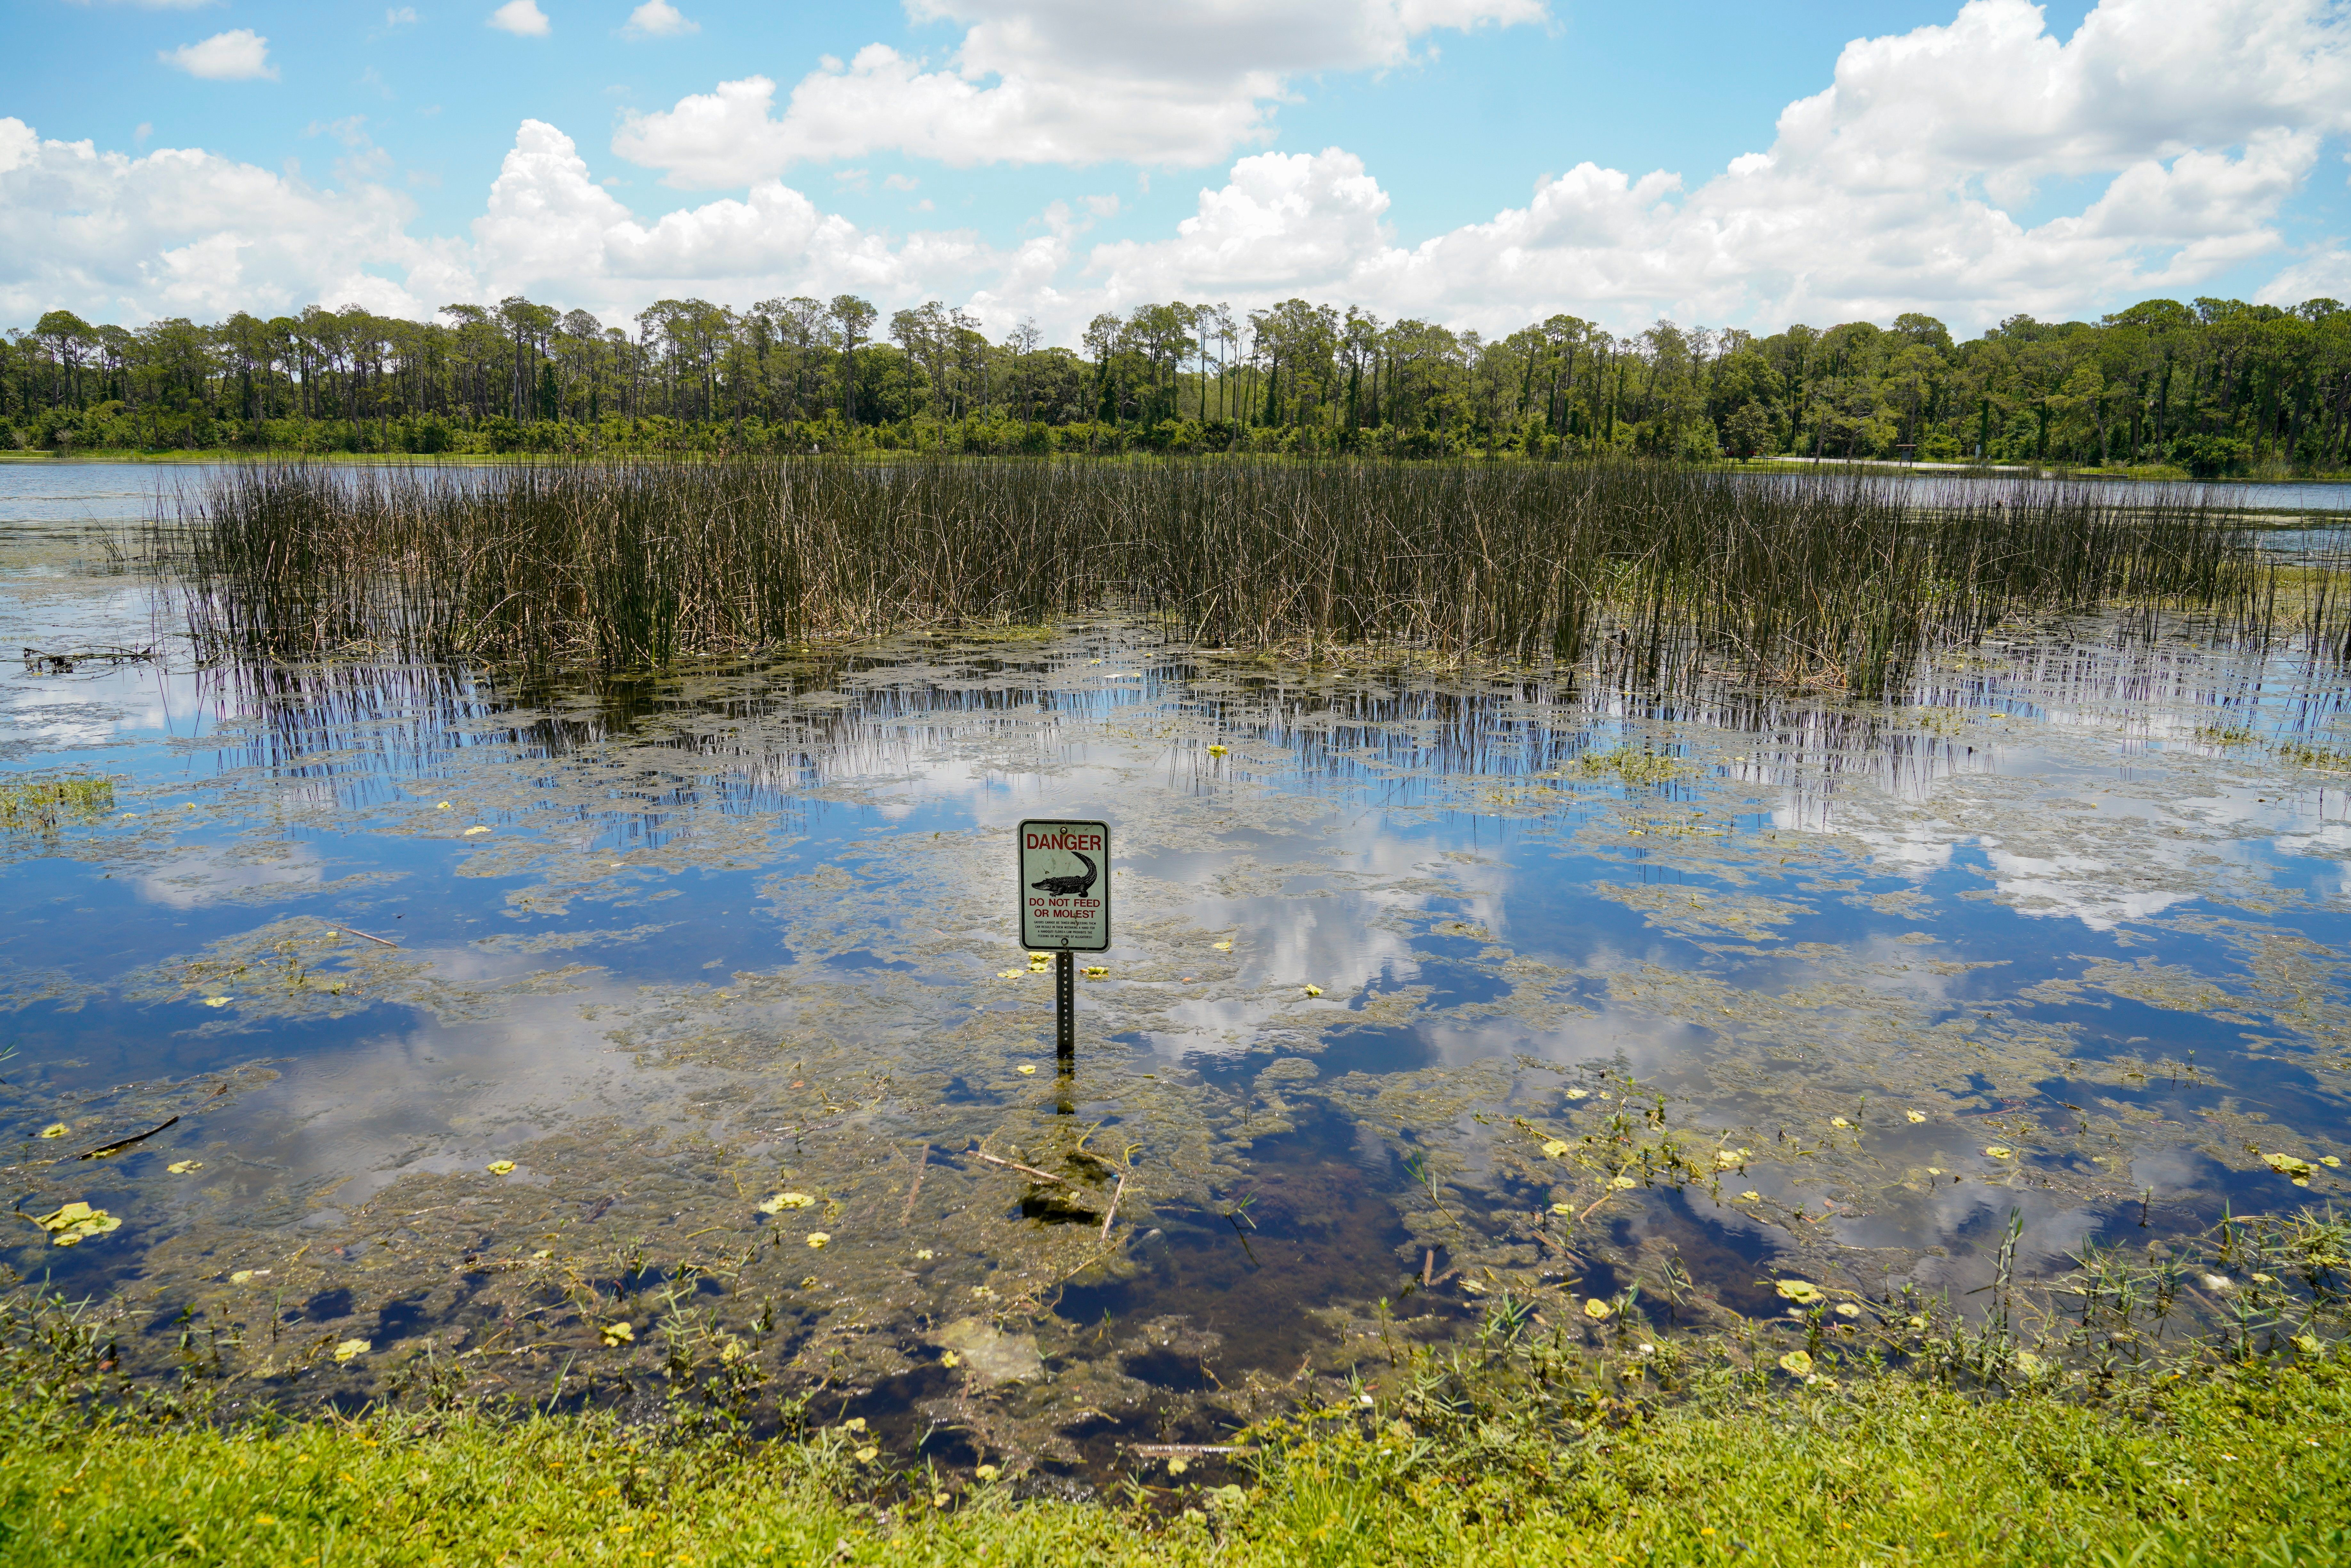 An alligator warning sign is posted in waters near the scene where a man was found dead after going into the lake to retrieve lost disc golf discs at John S. Taylor Park, Tuesday, May 31, 2022 in Largo, Fla